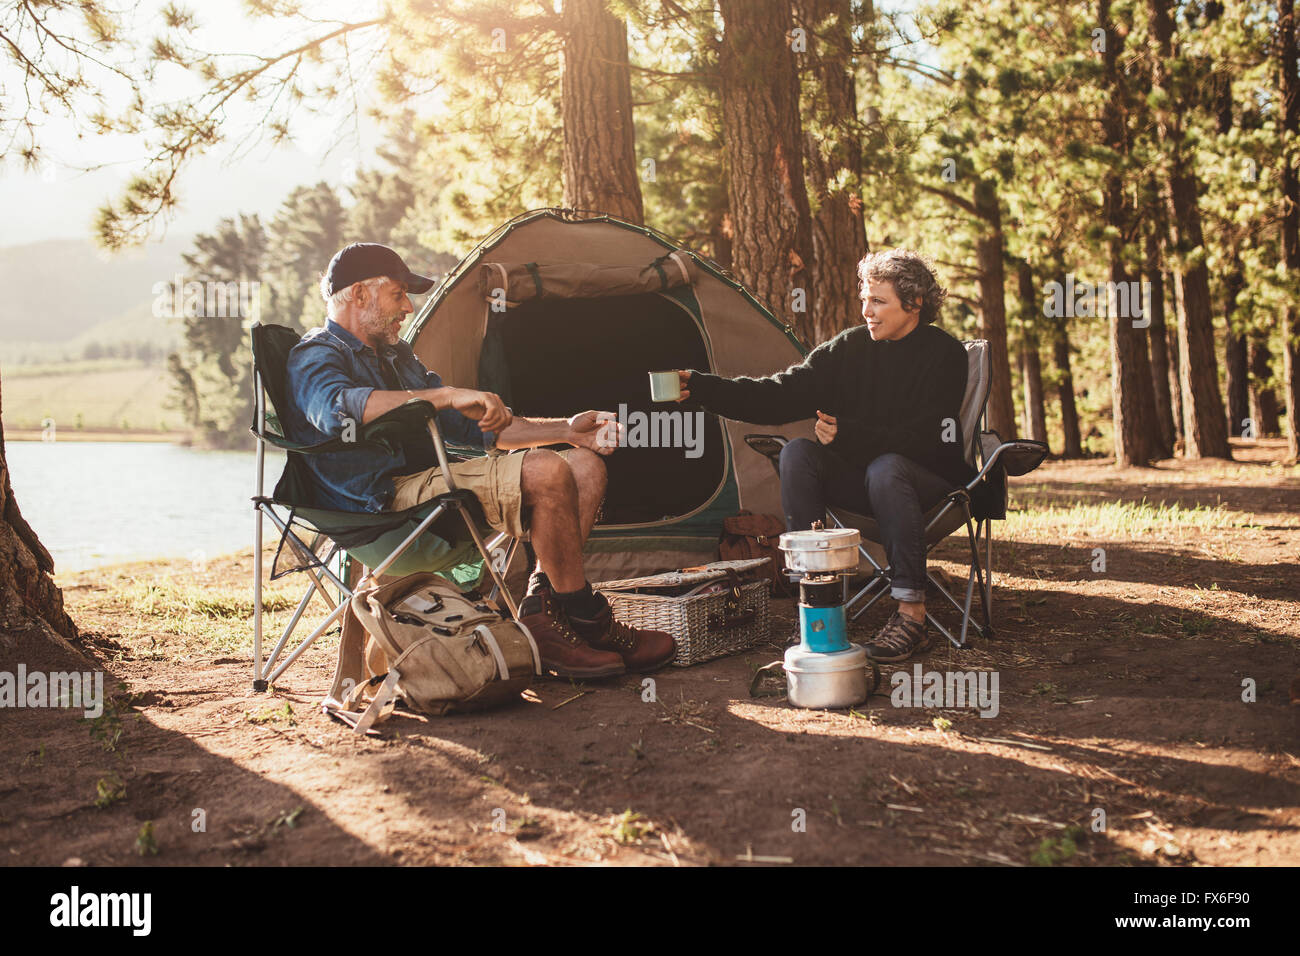 Portrait of senior couple camping by a lake, with woman giving a cup of coffee to man. Stock Photo